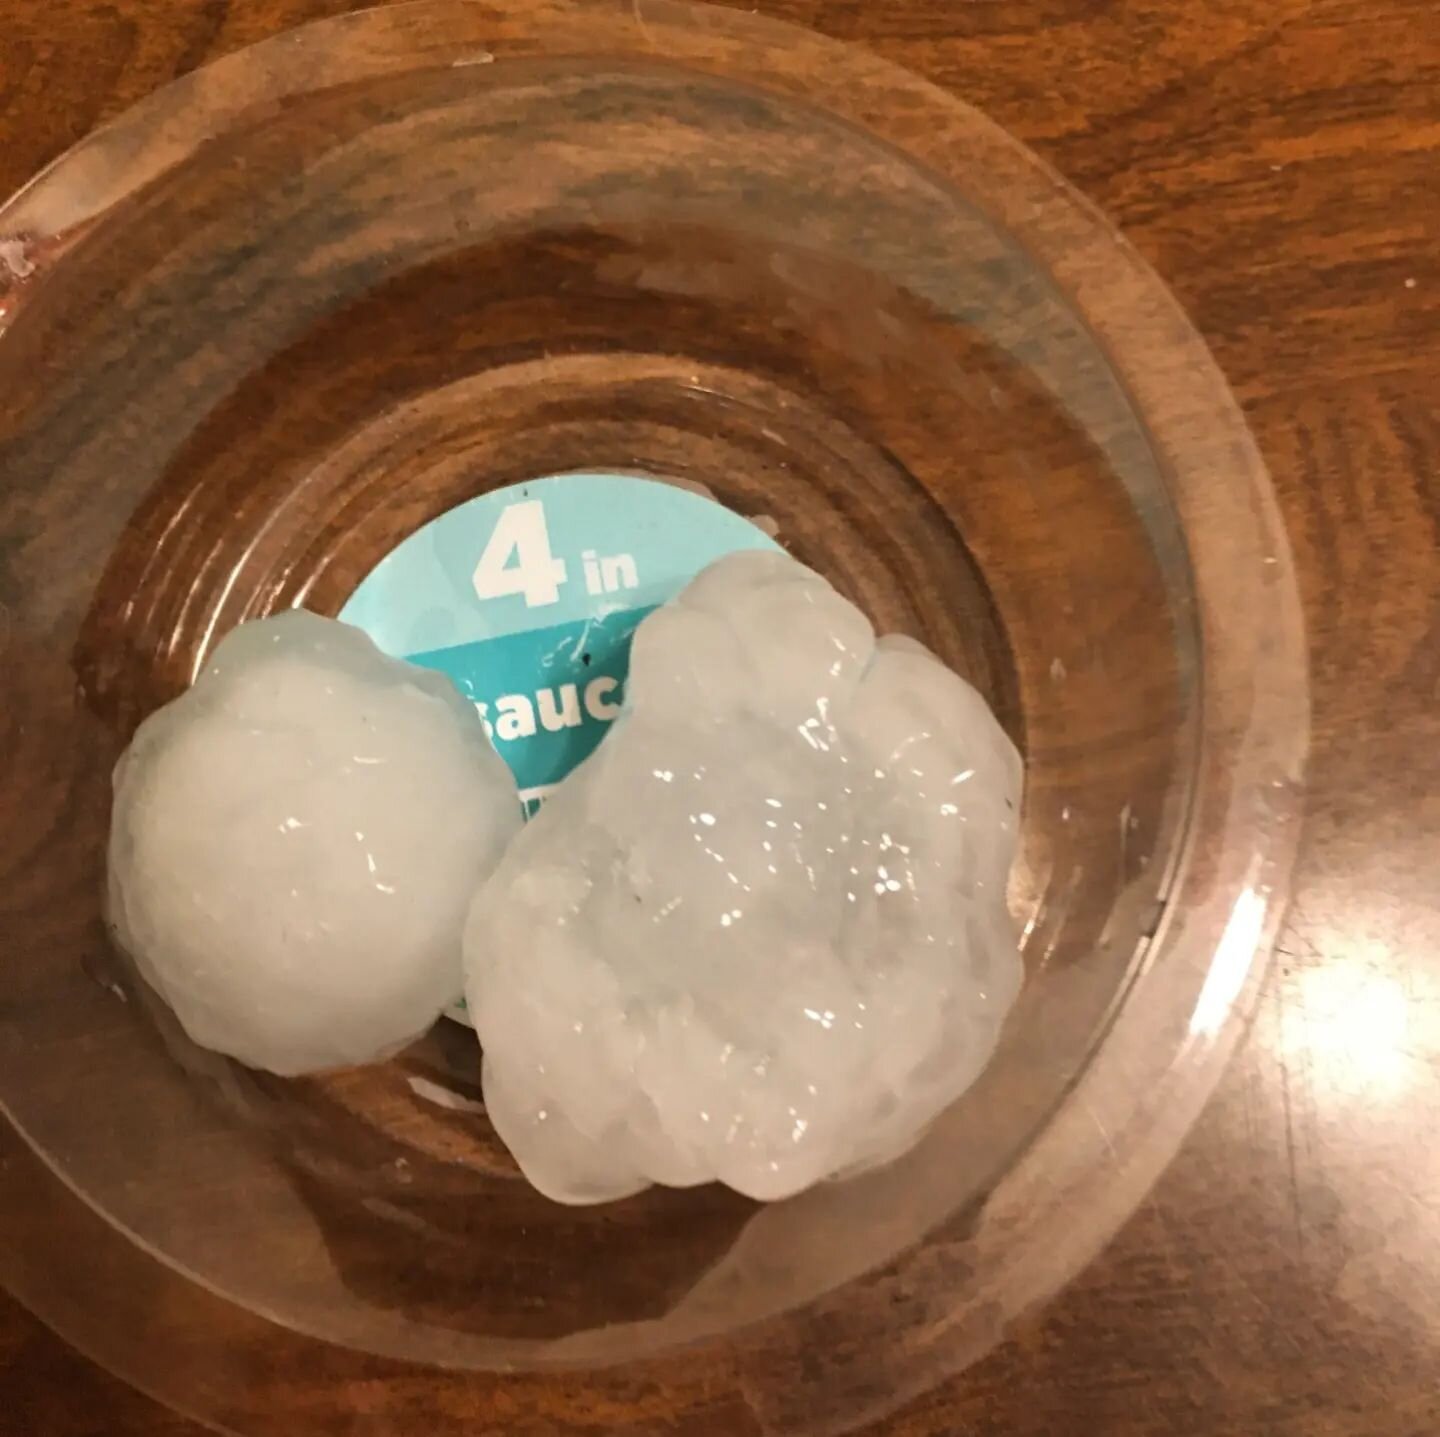 Some big hail hit the metro today. First photo from my mom's condo in WDM and the other is at my house in Merle Hay hood. I cringe thinking of tattered leaves. But Patrick put it into perspective: first save the kitties (they came in just ahead of th